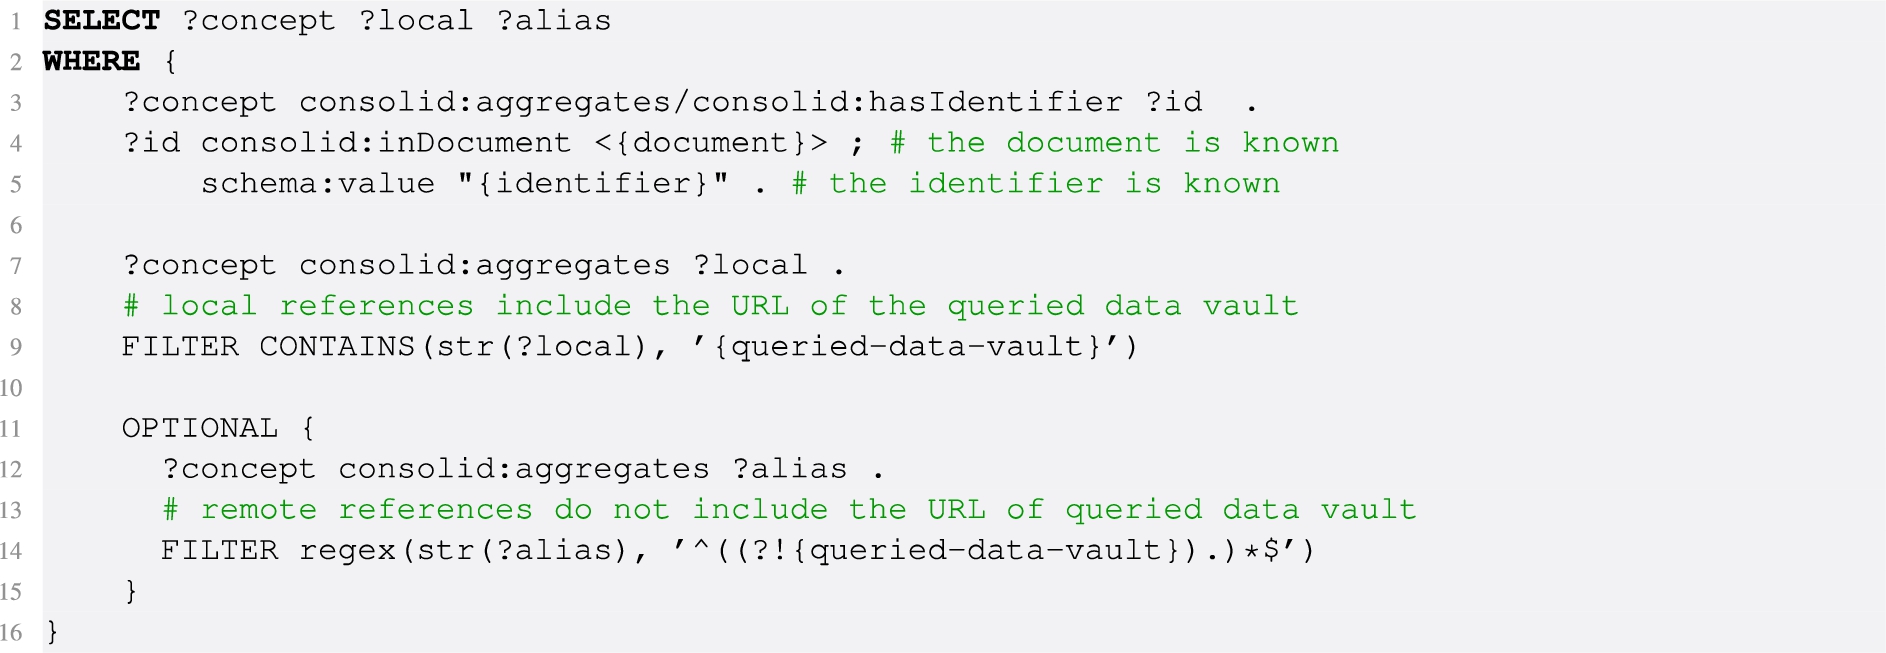 Query pattern to find the local references of a specific Reference Aggregator given a known reference, and the potential remote aliases of this concept